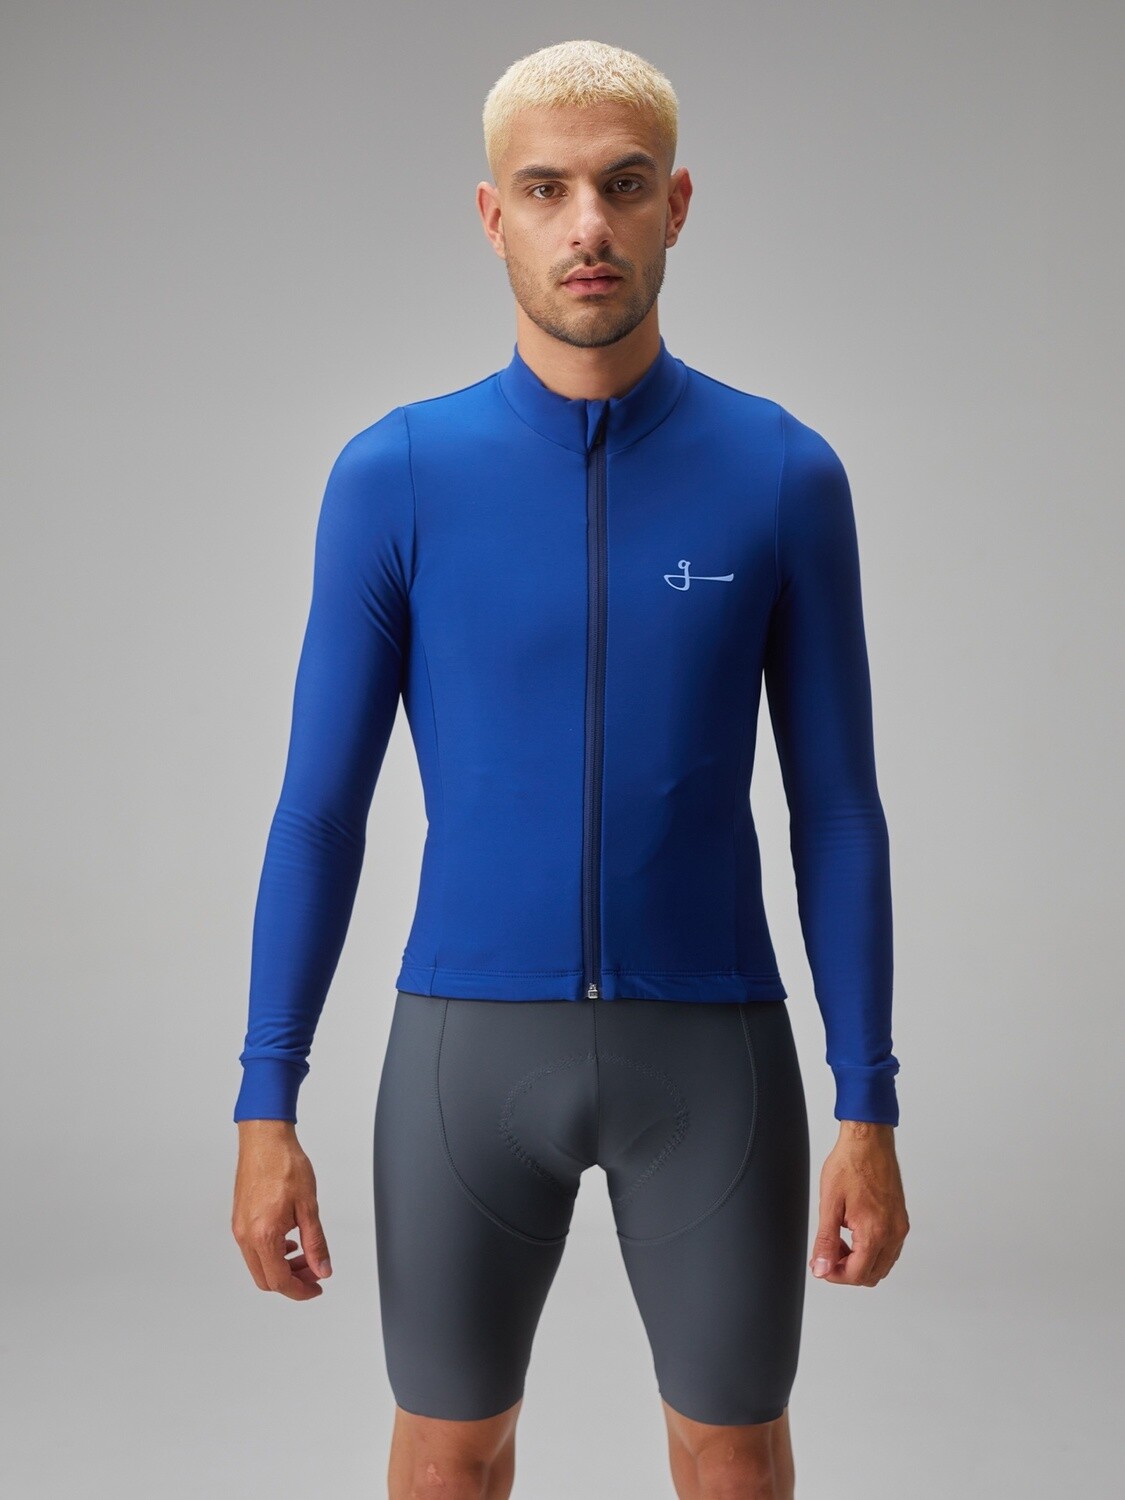 Givelo G90 Thermal Jersey LS Royal Blue Men